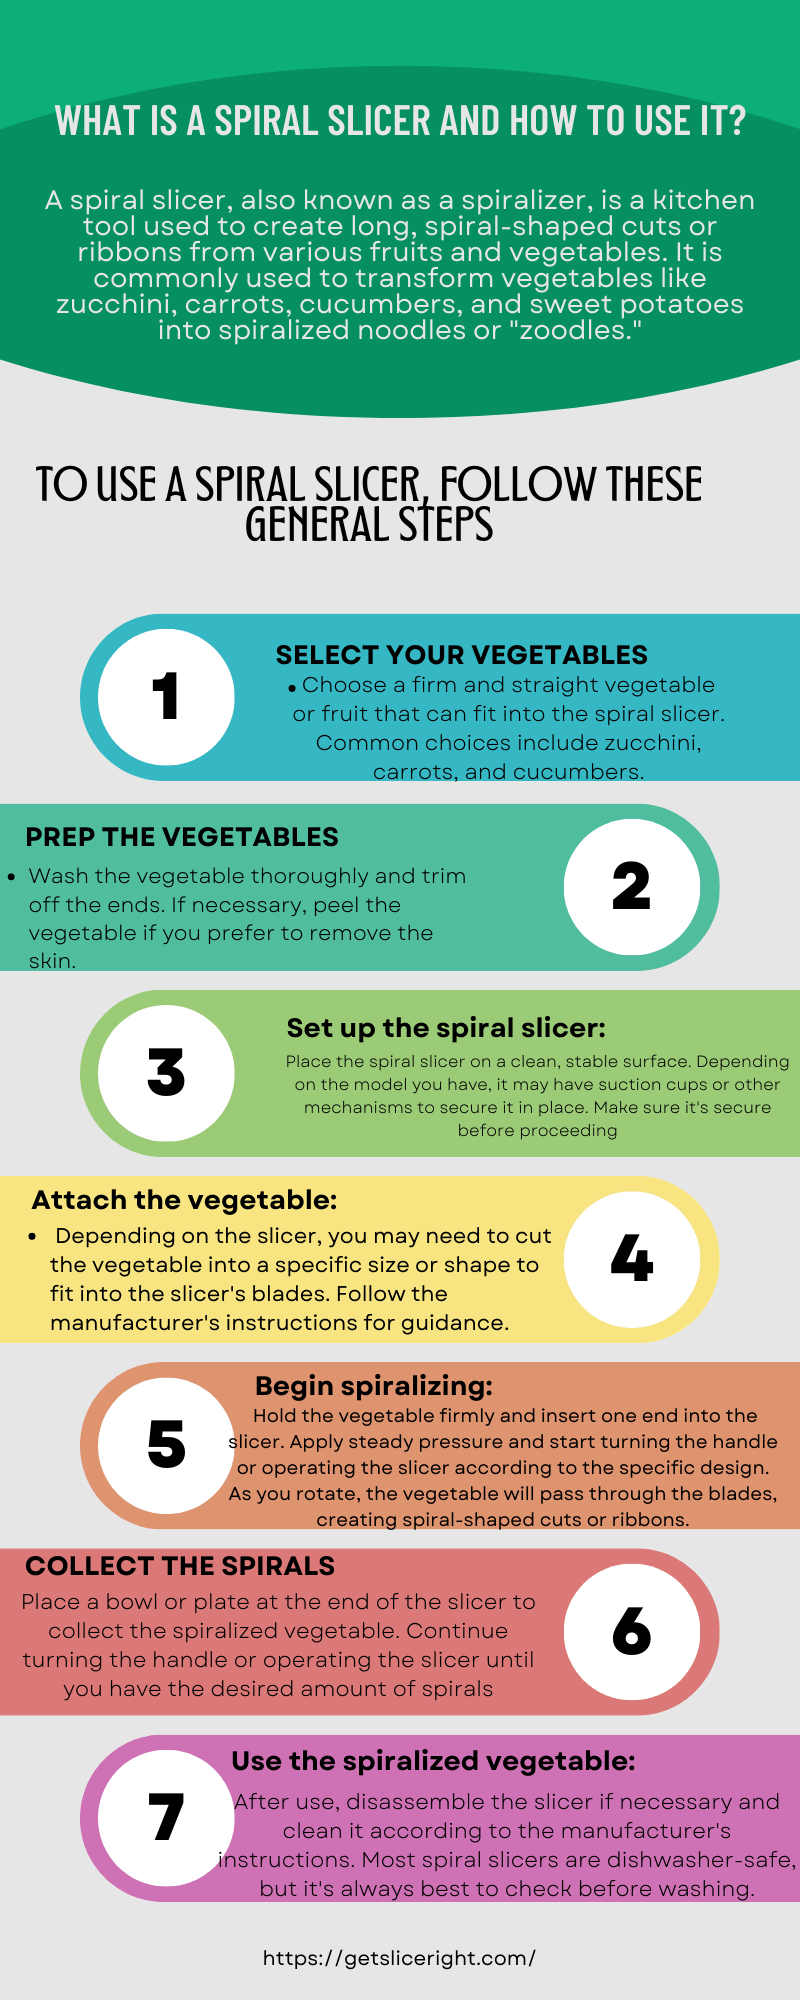 What is a spiral slicer and how to use it - Getsliceright Infographic